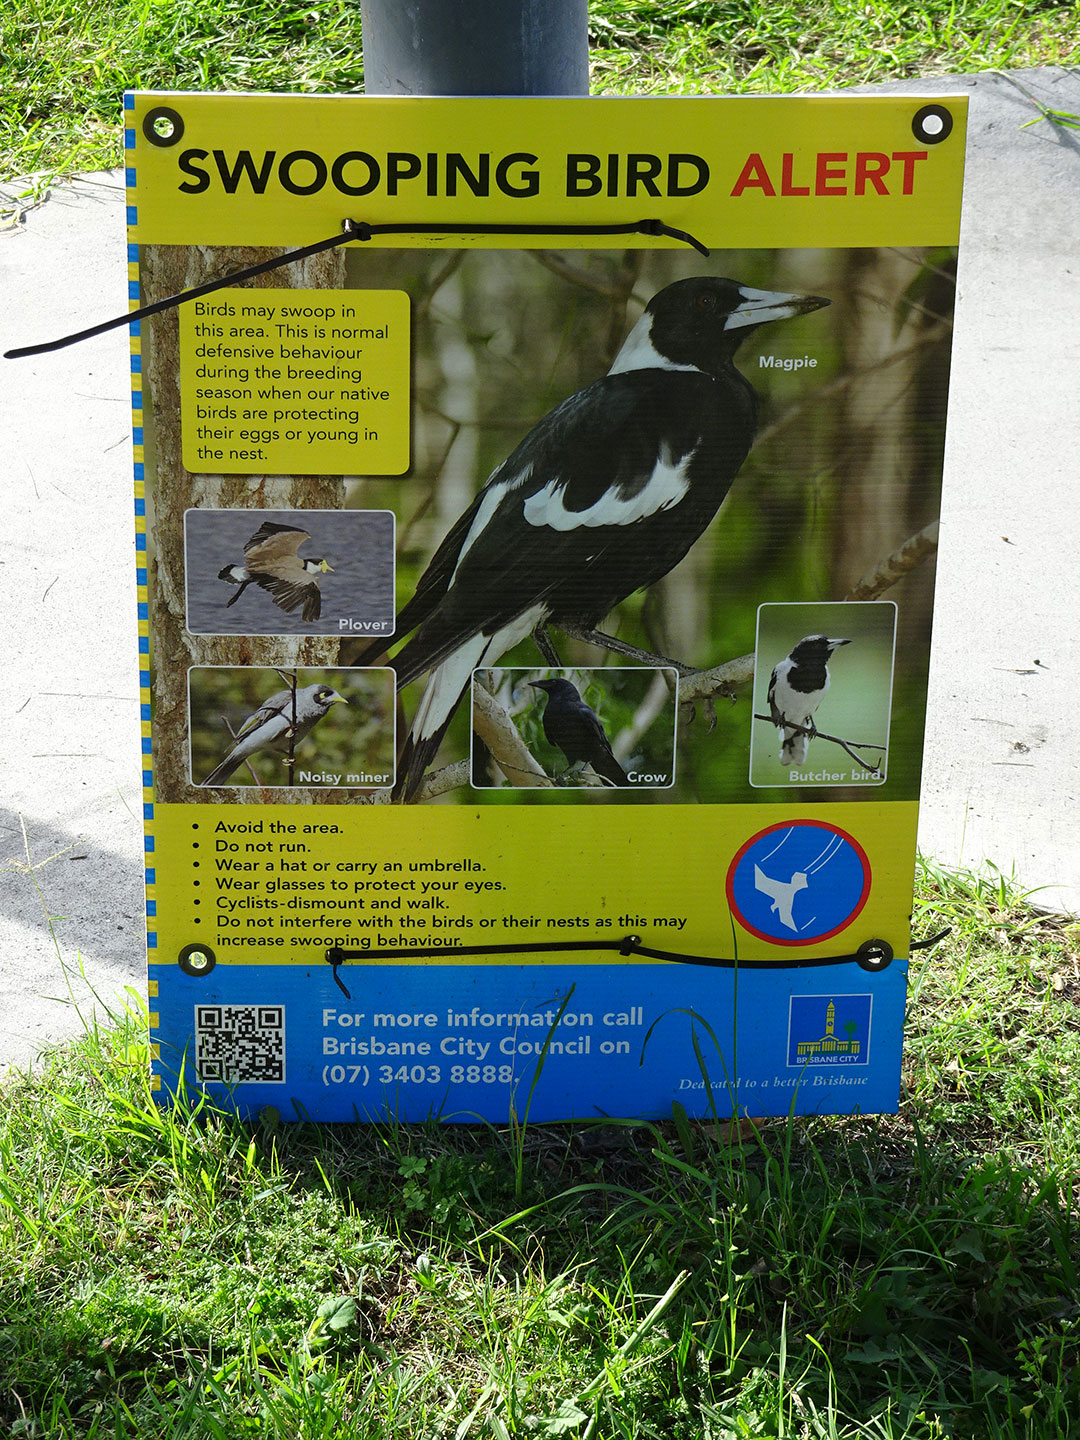 A sign warning about swooping birds